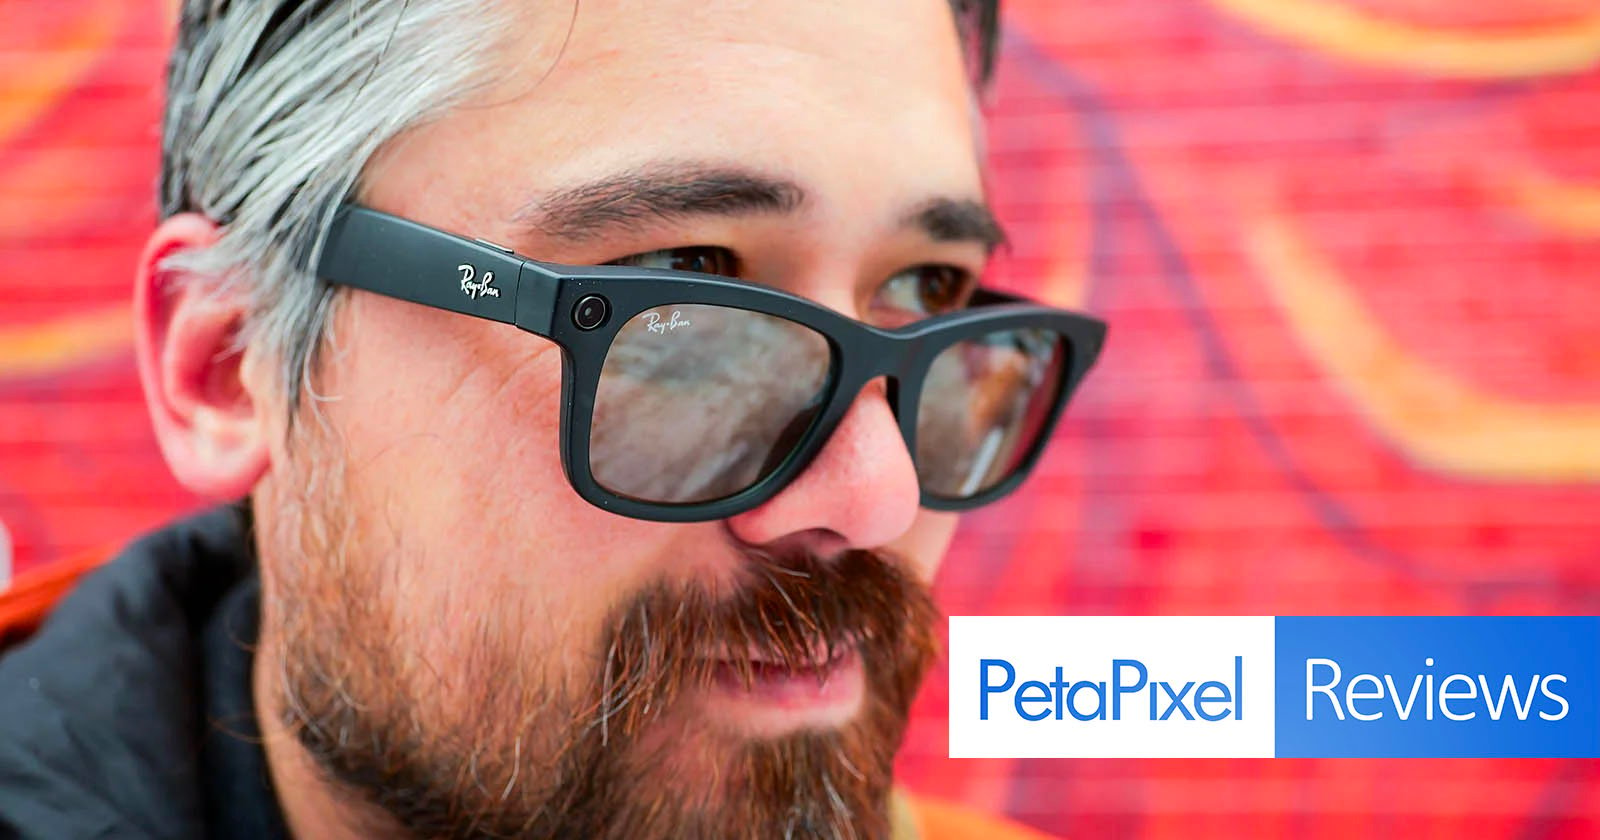 Ray-Ban Meta Smart Glasses Review: Fine Audio and Video, Privacy